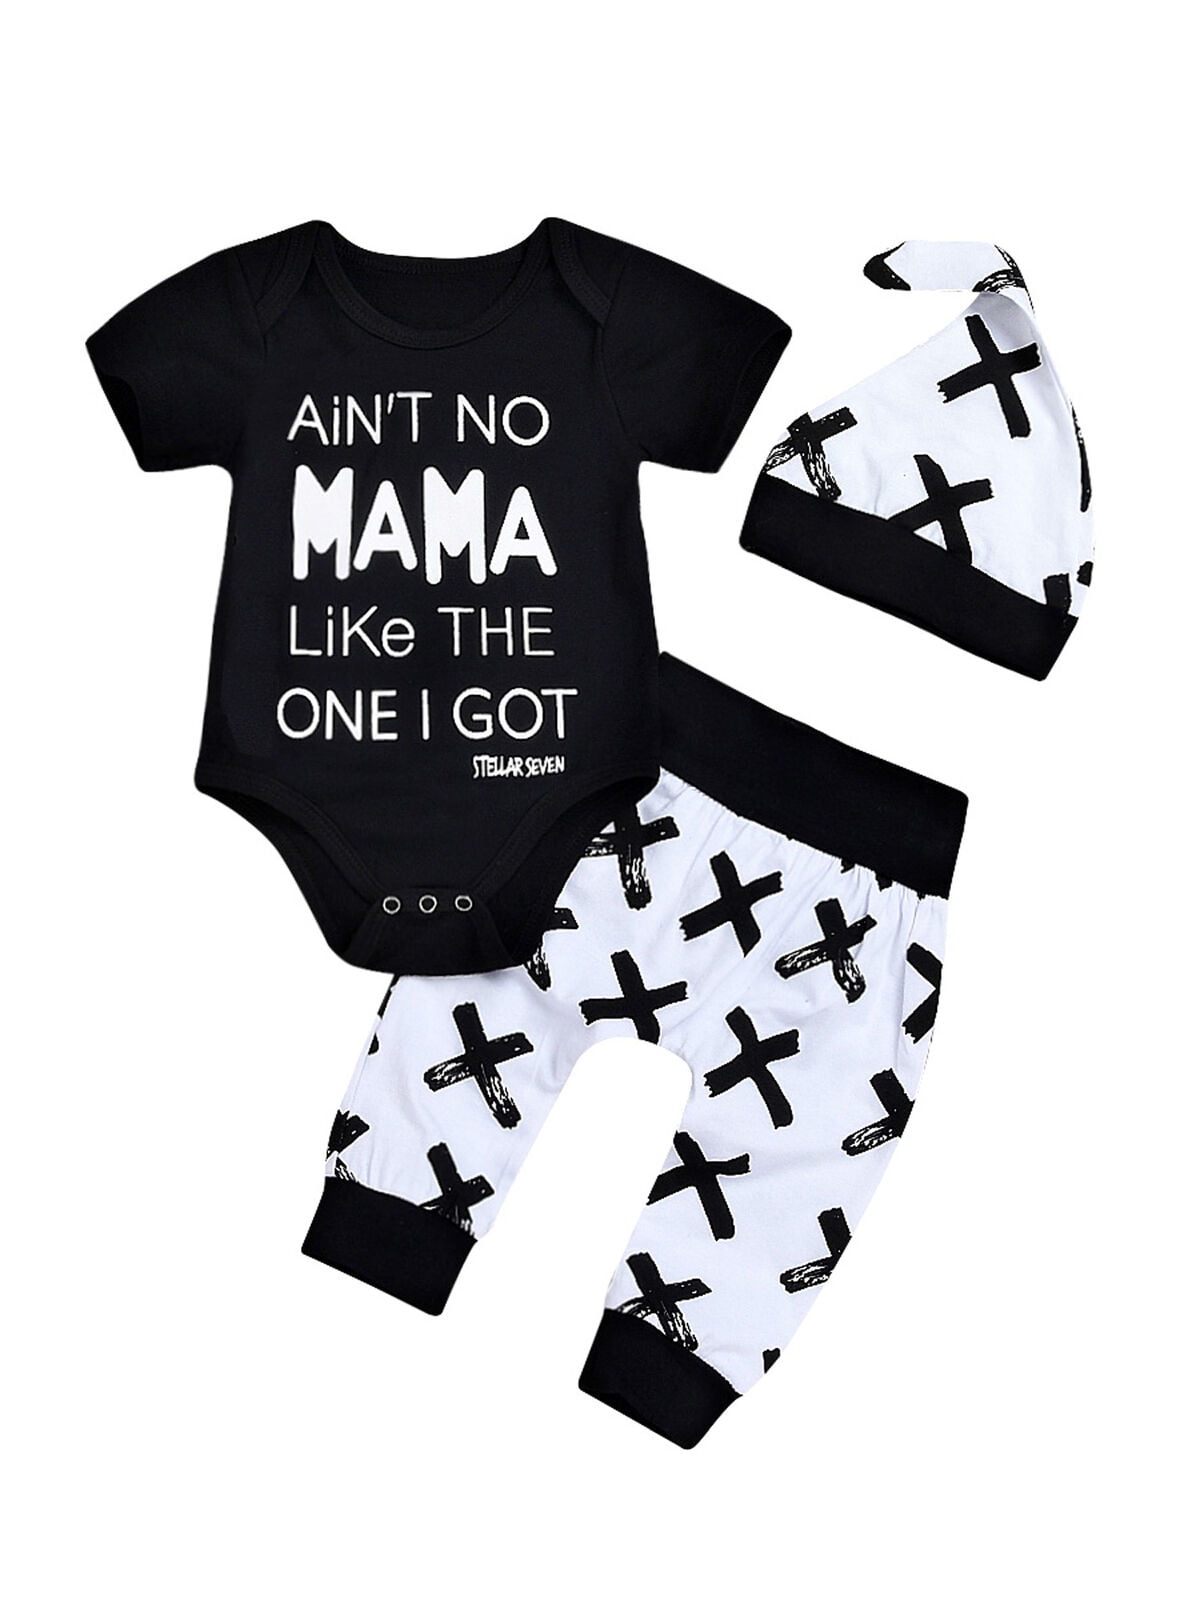 US 3pcs Newborn Baby Star Striped Tops T-shirt+Pants Outfit Boy Girl Clothes Set 